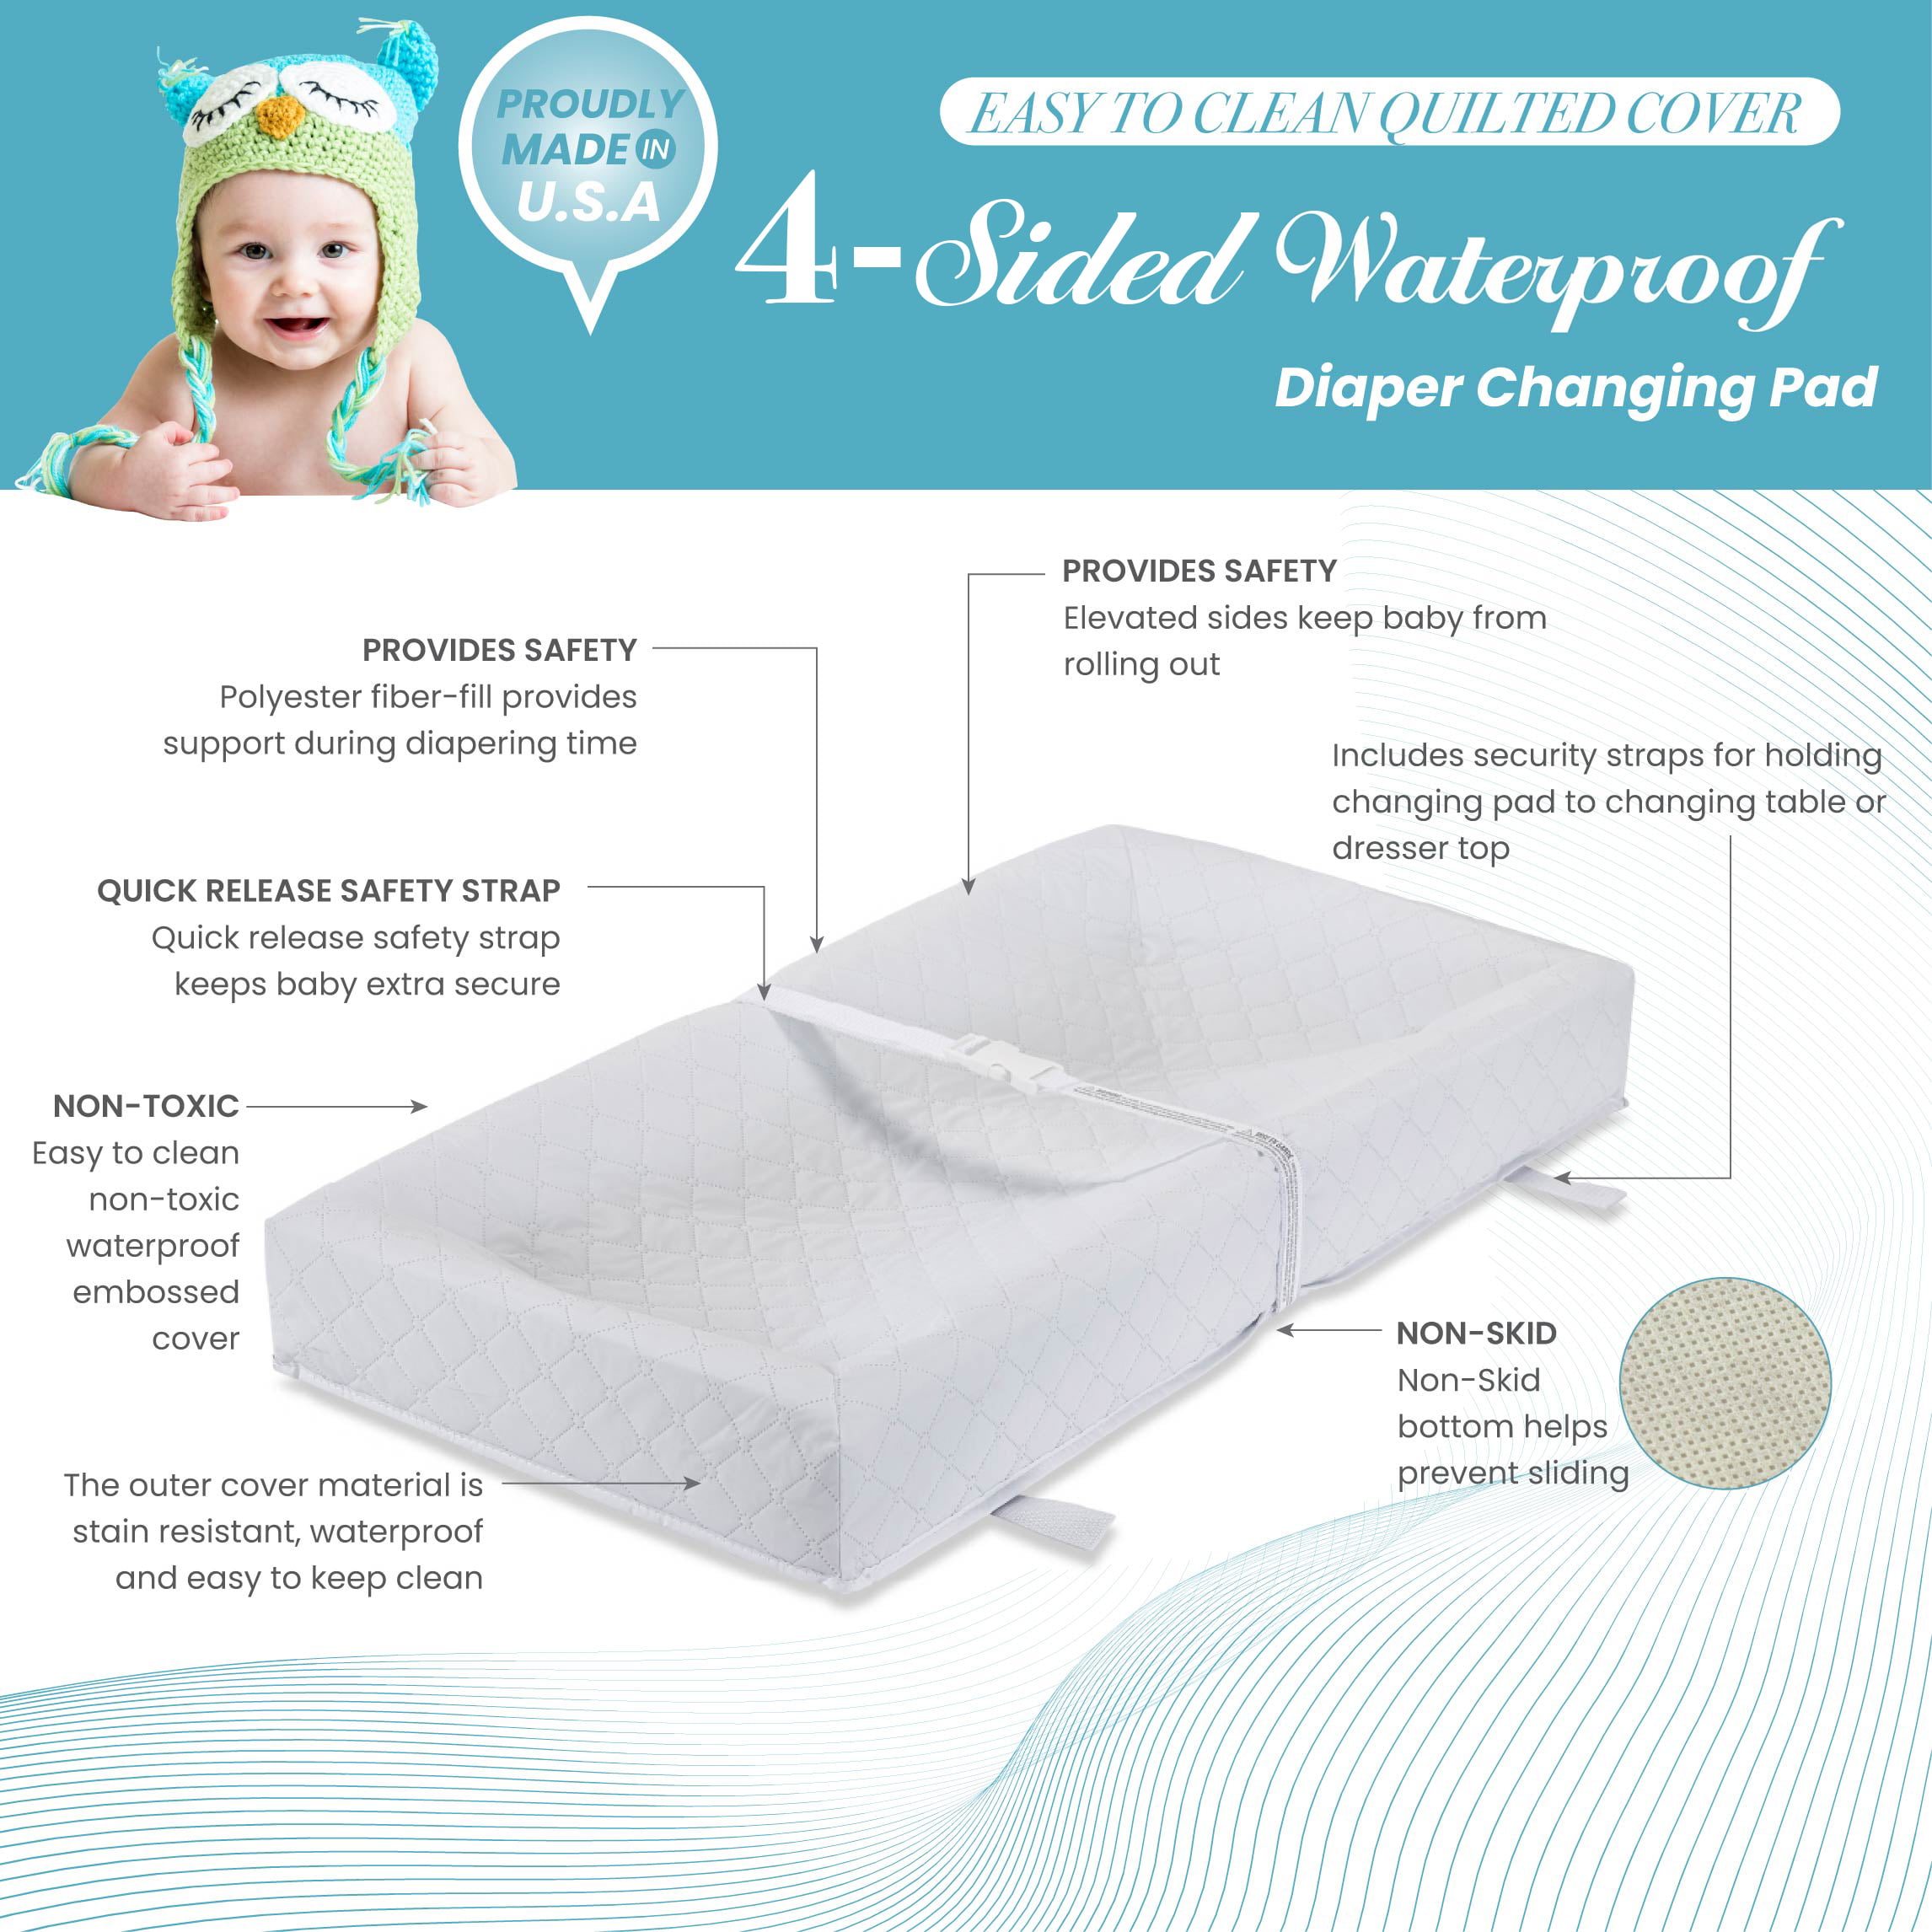 La Baby 4 Sided Waterproof Diaper, How To Keep Changing Pad From Sliding On Dresser